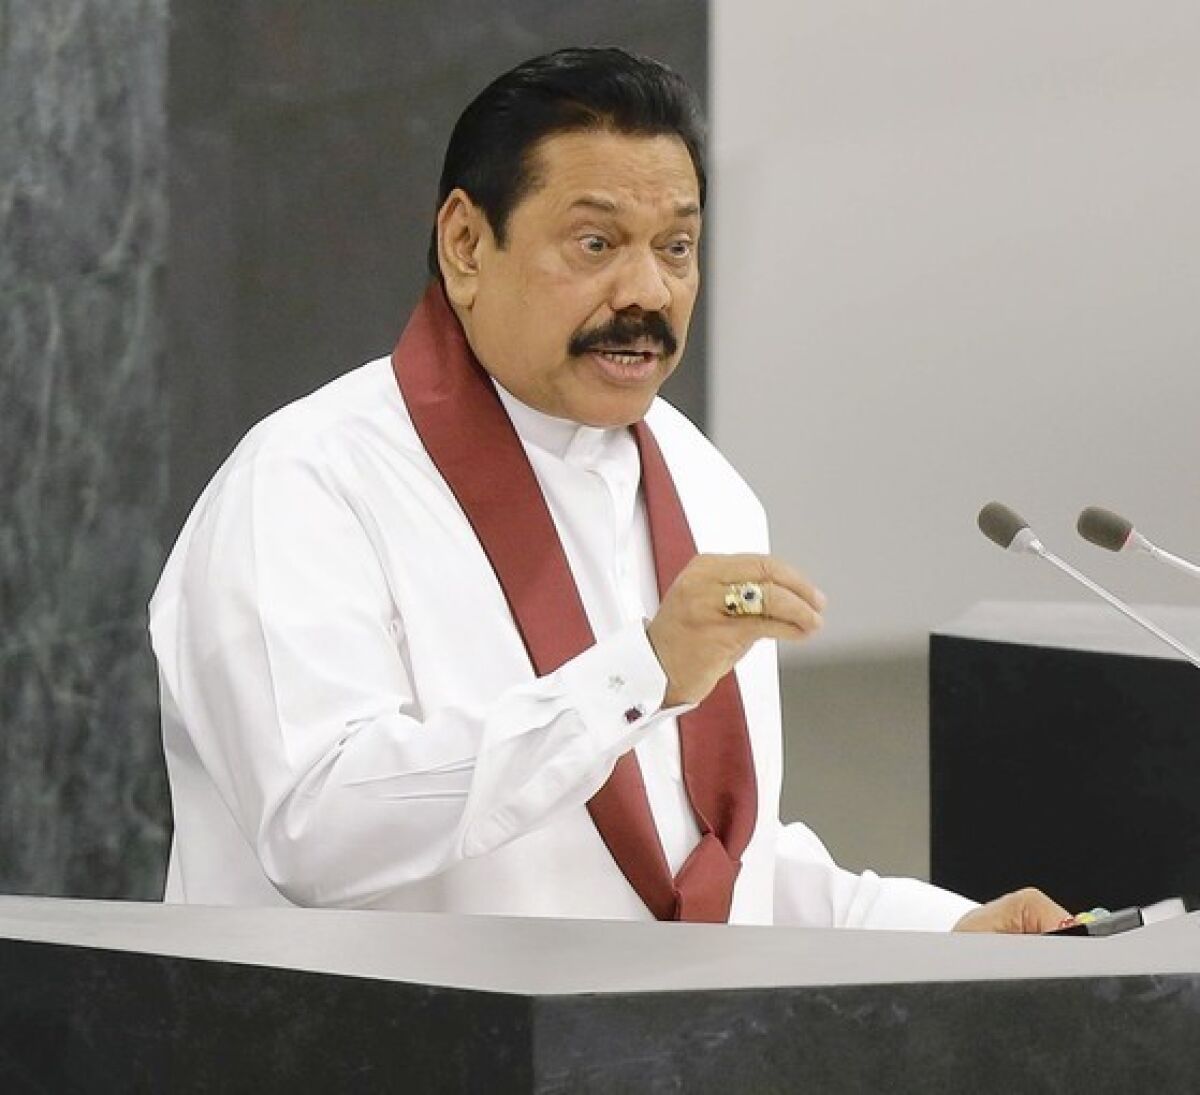 Mahinda Rajapaksa, the president of Sri Lanka, delivers his speech at the U.N. General Assembly in New York. In an interview later at his hotel, he deflected criticism of his government’s rights record and said the U.N. and Western powers seemed bent on harassing Sri Lanka.